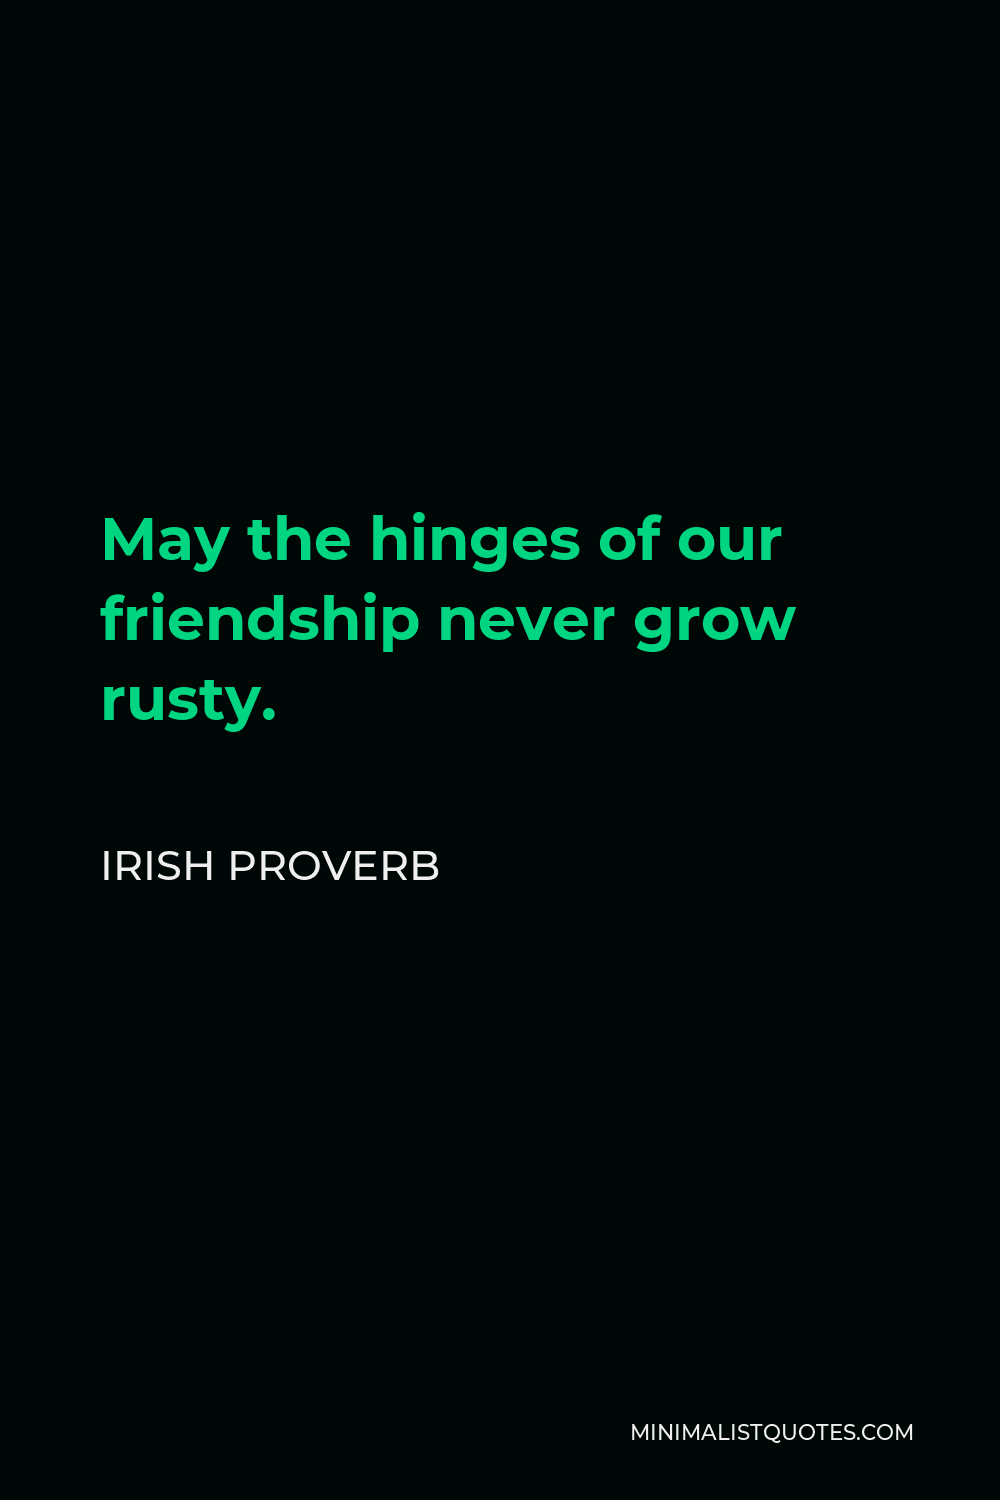 Irish Proverb Quote - May the hinges of our friendship never grow rusty.